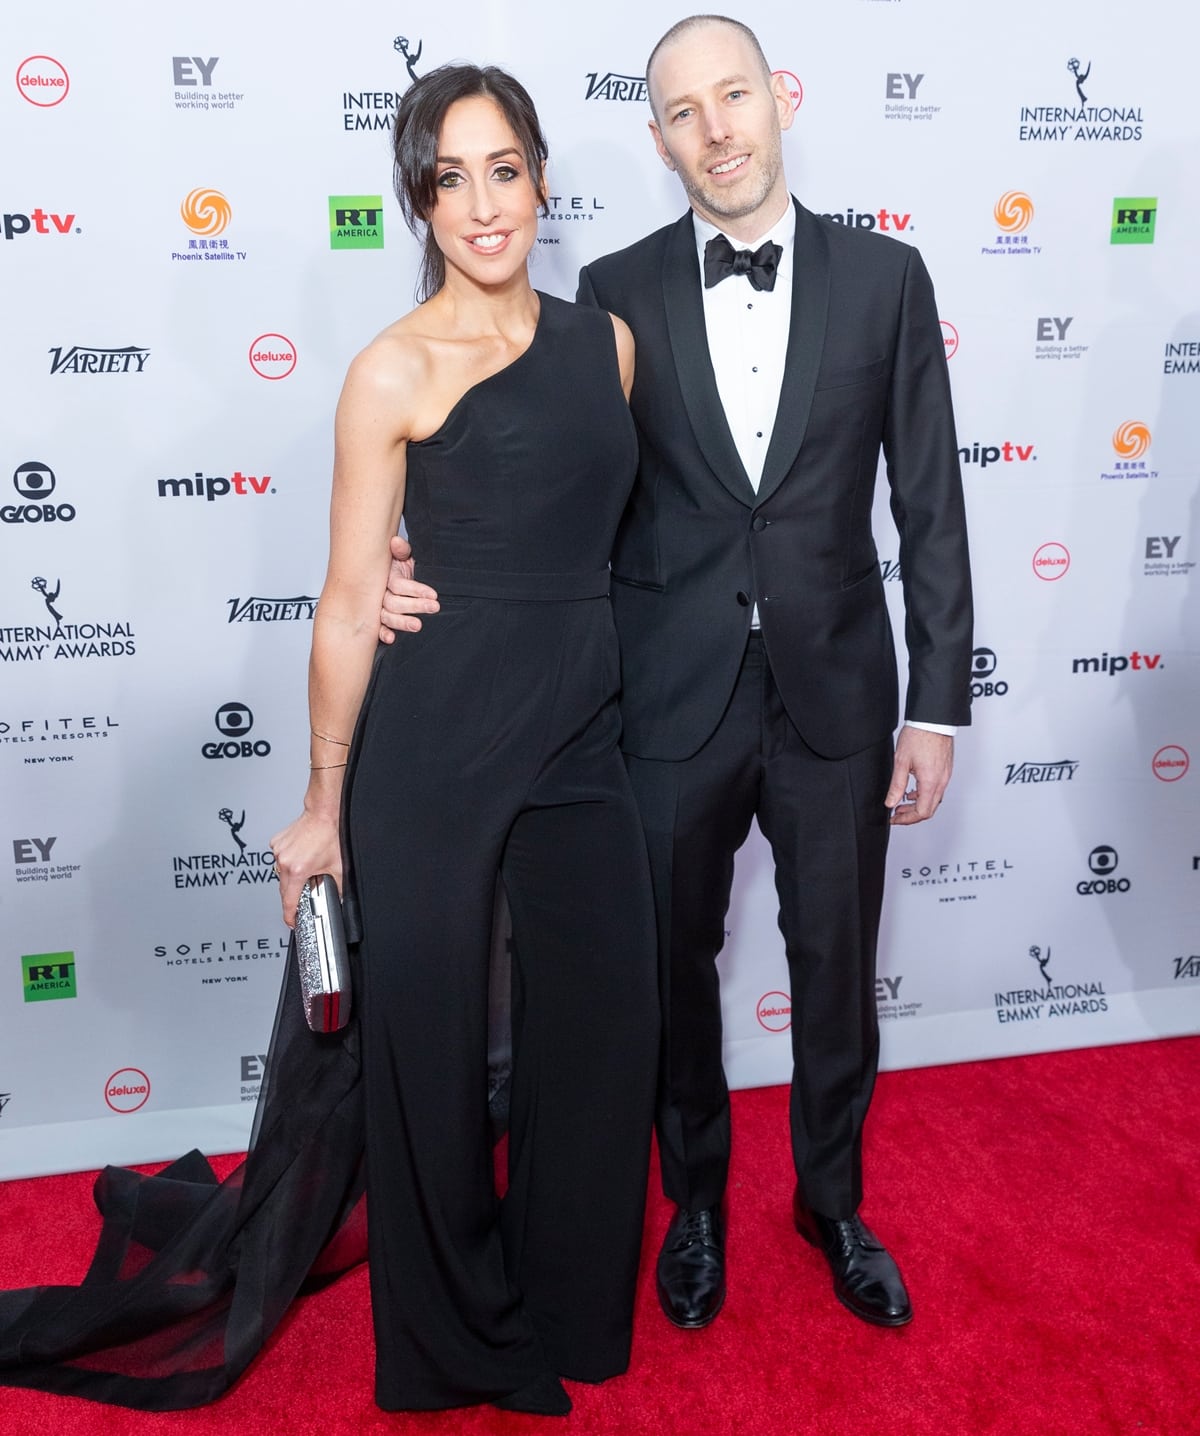 Catherine Reitman and her husband Philip Sternberg attend the 46th Annual International Emmy Awards